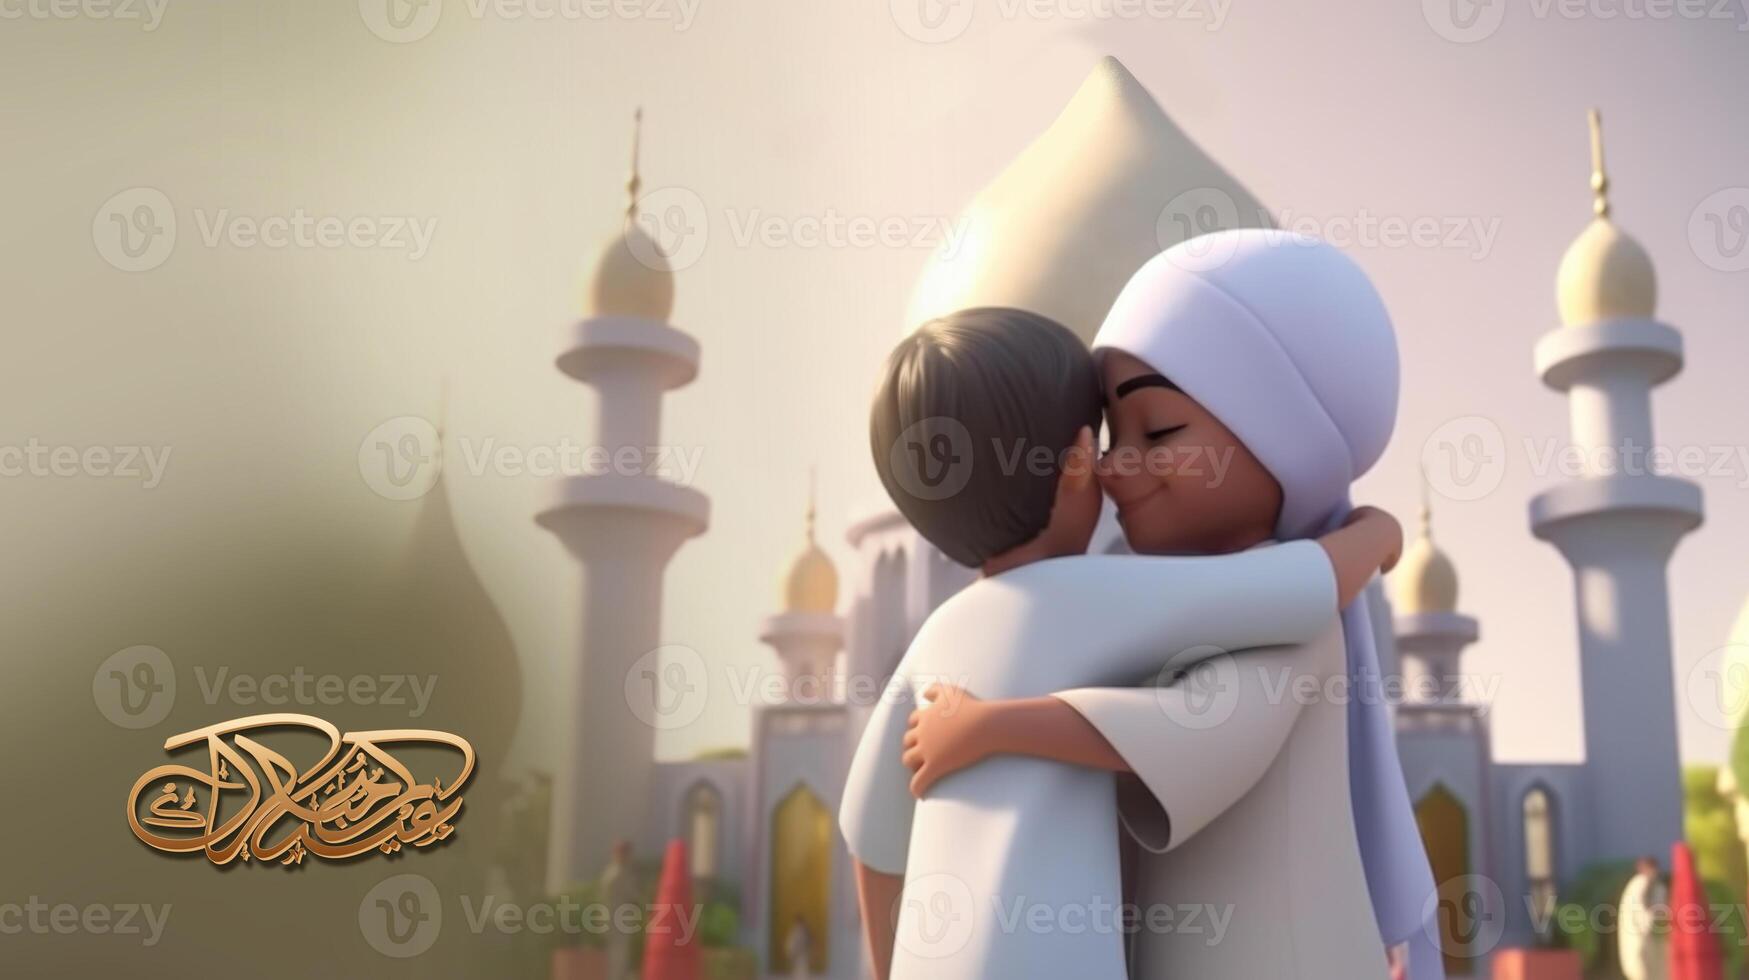 Adorable Disney Style Avatar of Muslim Kids Hugging and Wishing Each Other on The Occasion of Eid Mubarak. . photo